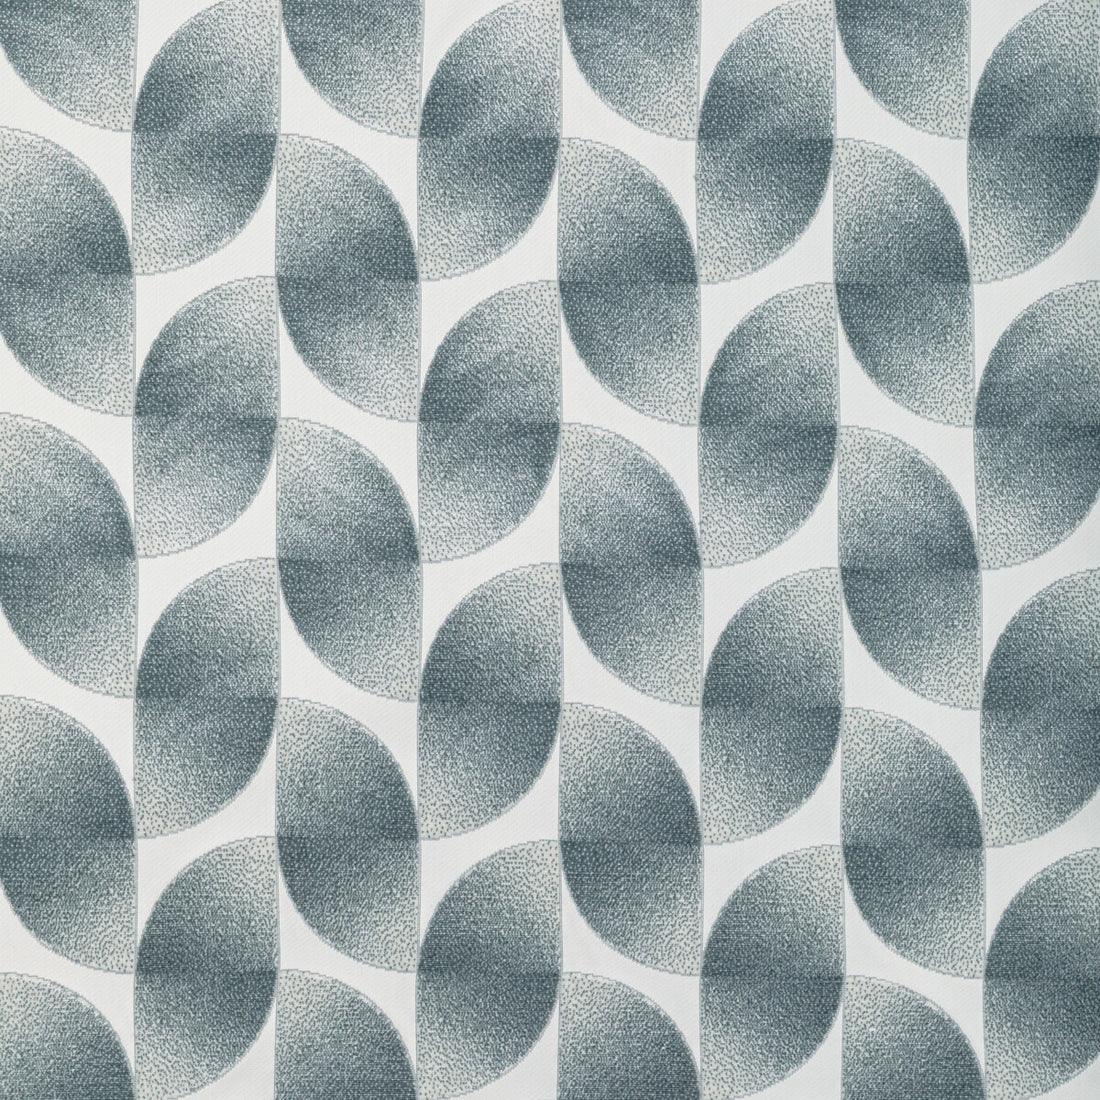 Moon Splice fabric in chambray color - pattern 36576.5.0 - by Kravet Couture in the Modern Luxe Silk Luster collection